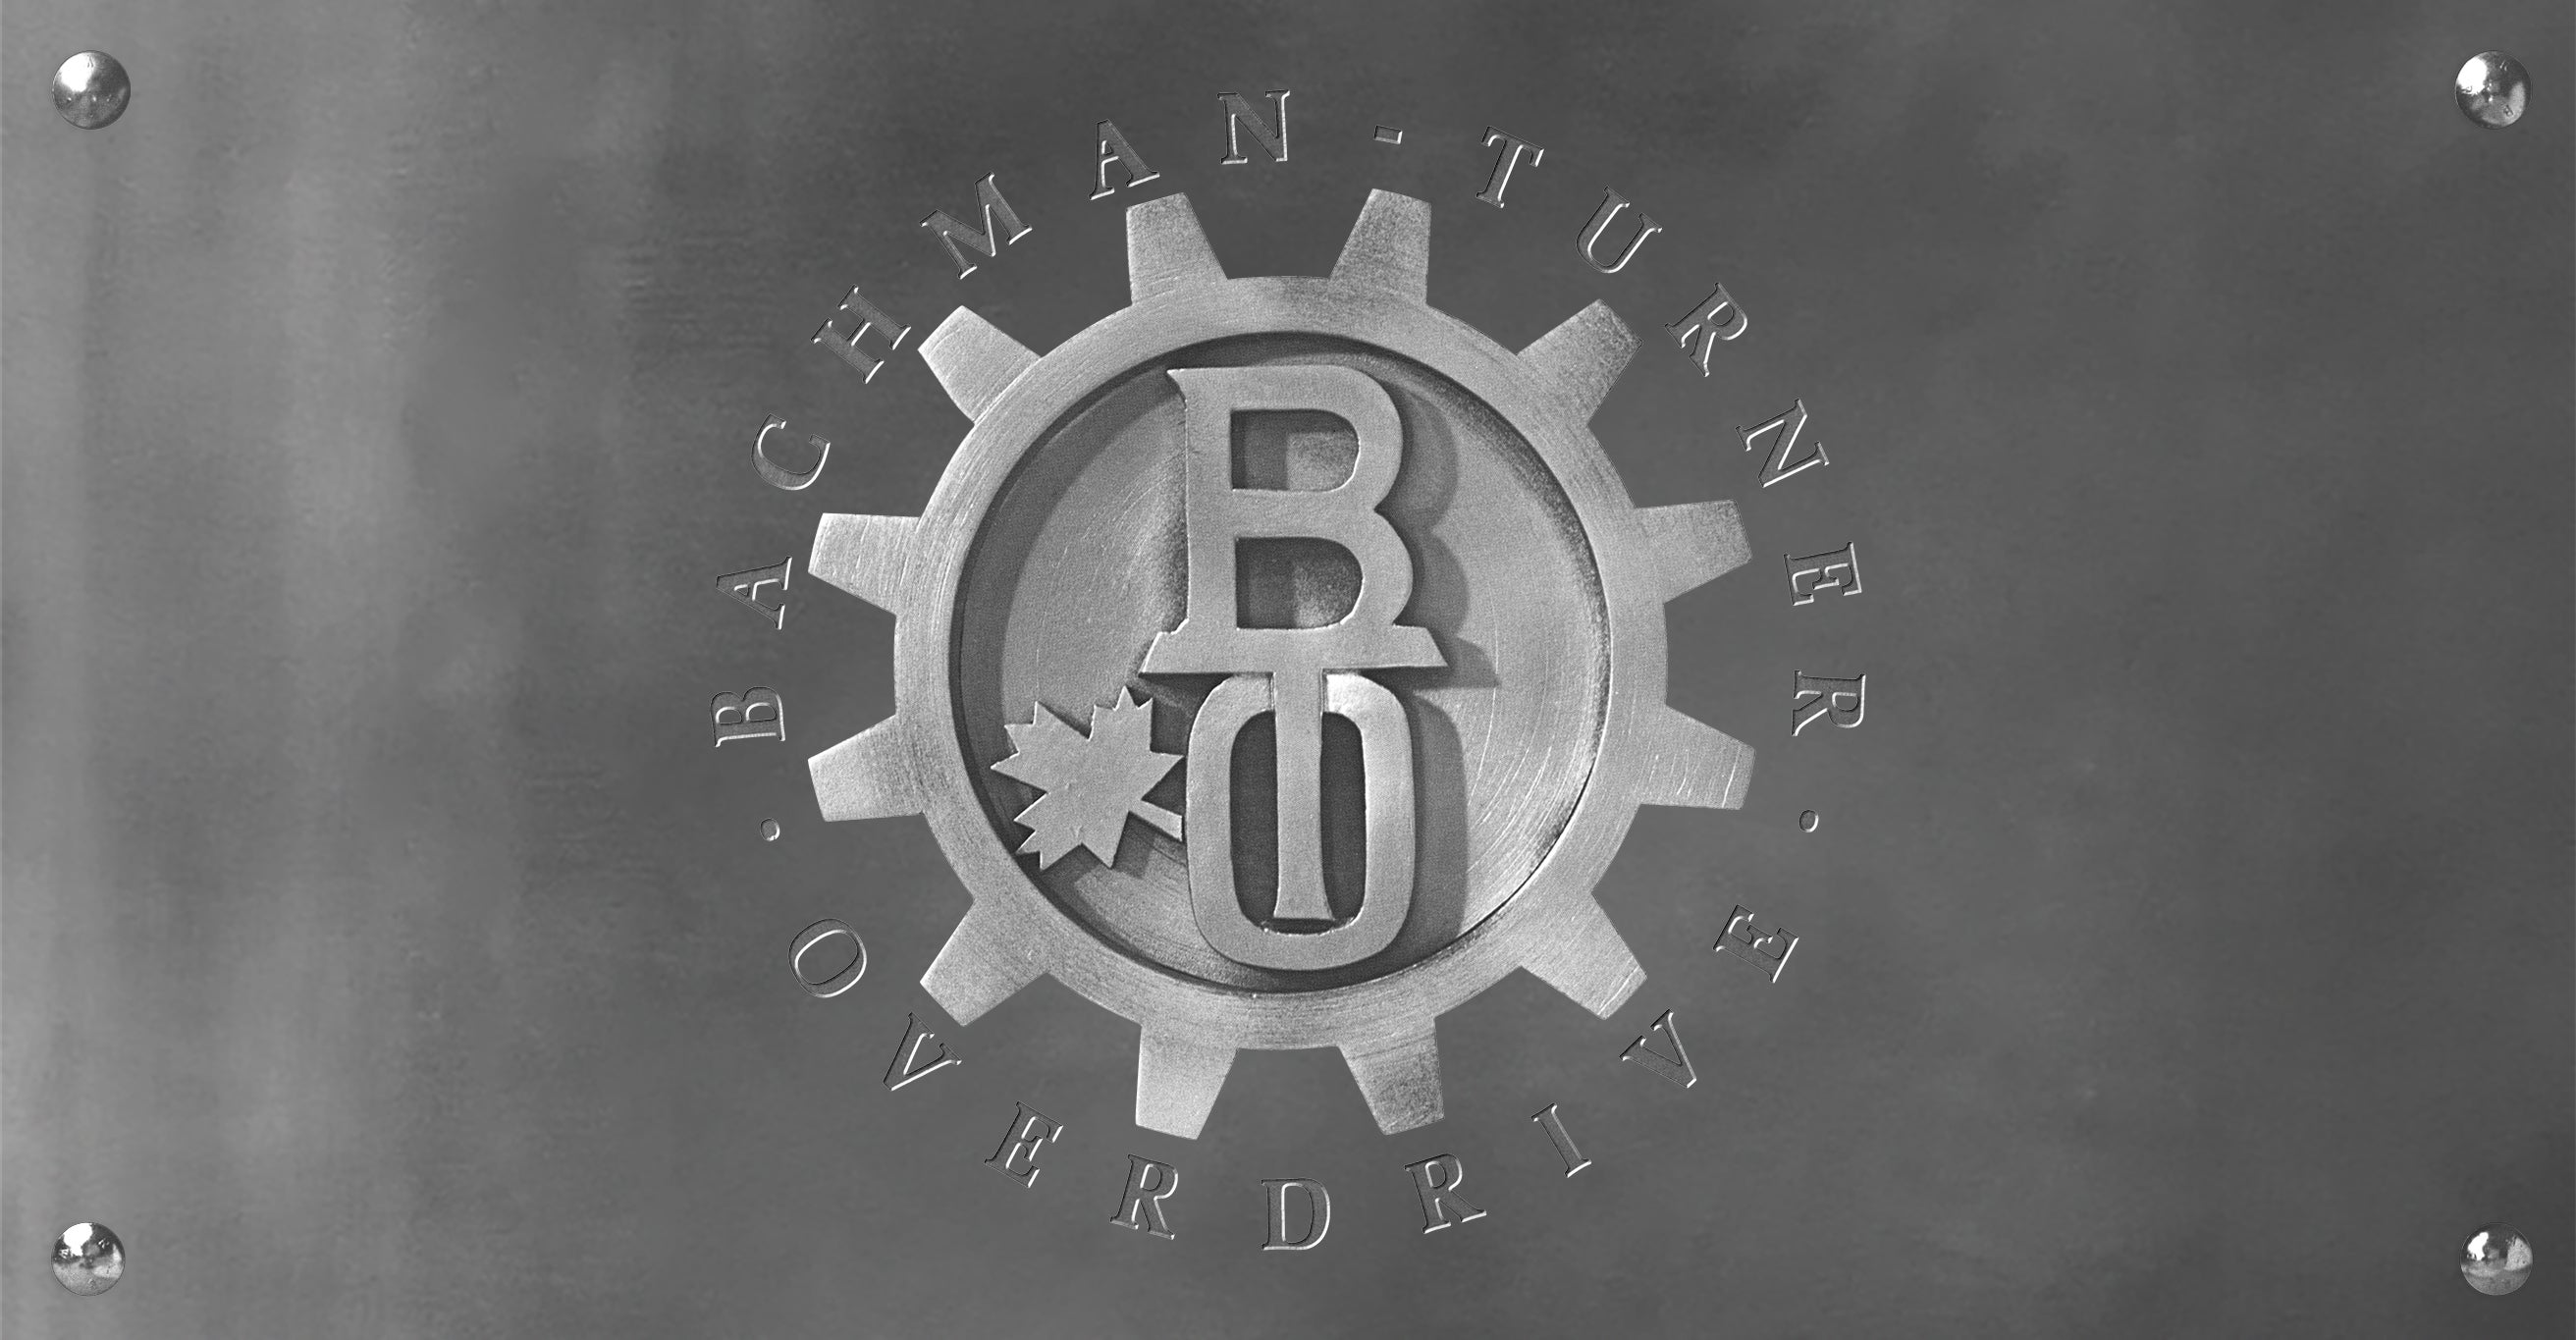 An Evening with Bachman-Turner Overdrive free presale pa55w0rd